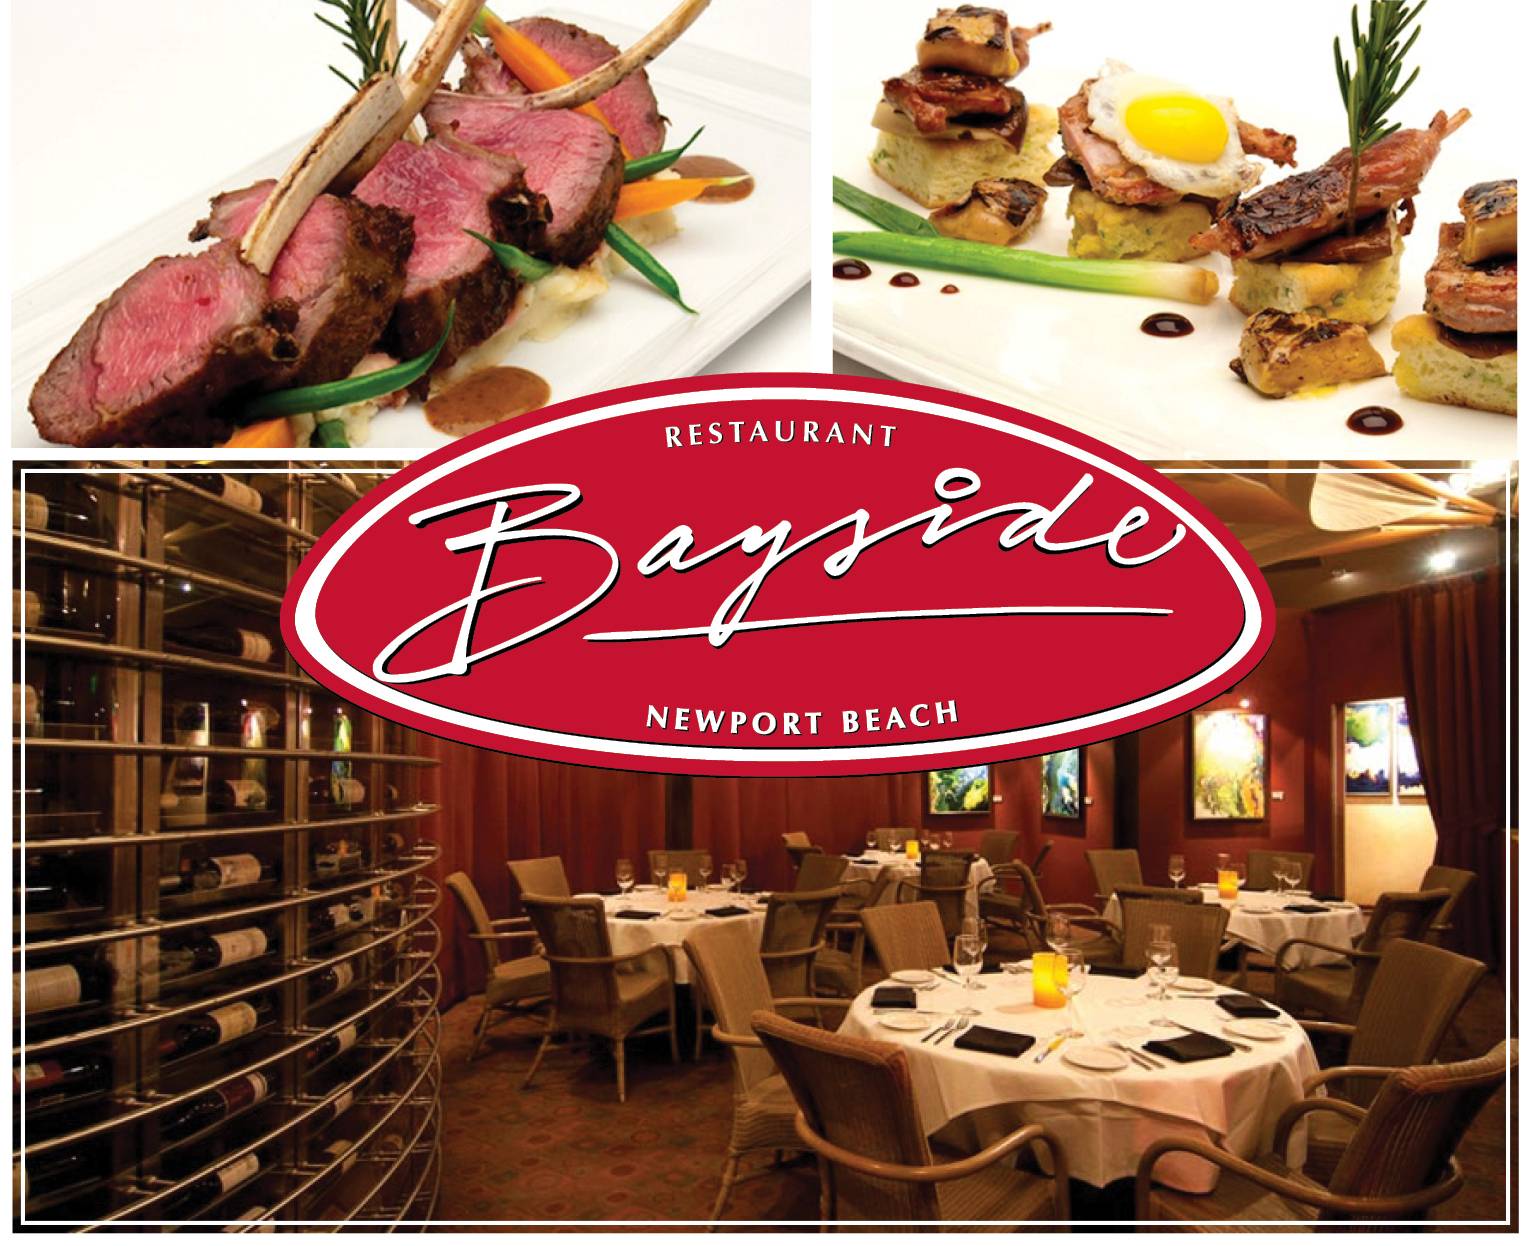 May 2022 Sunset Networking Mixer and Annual Meeting - Bayside Restaurant